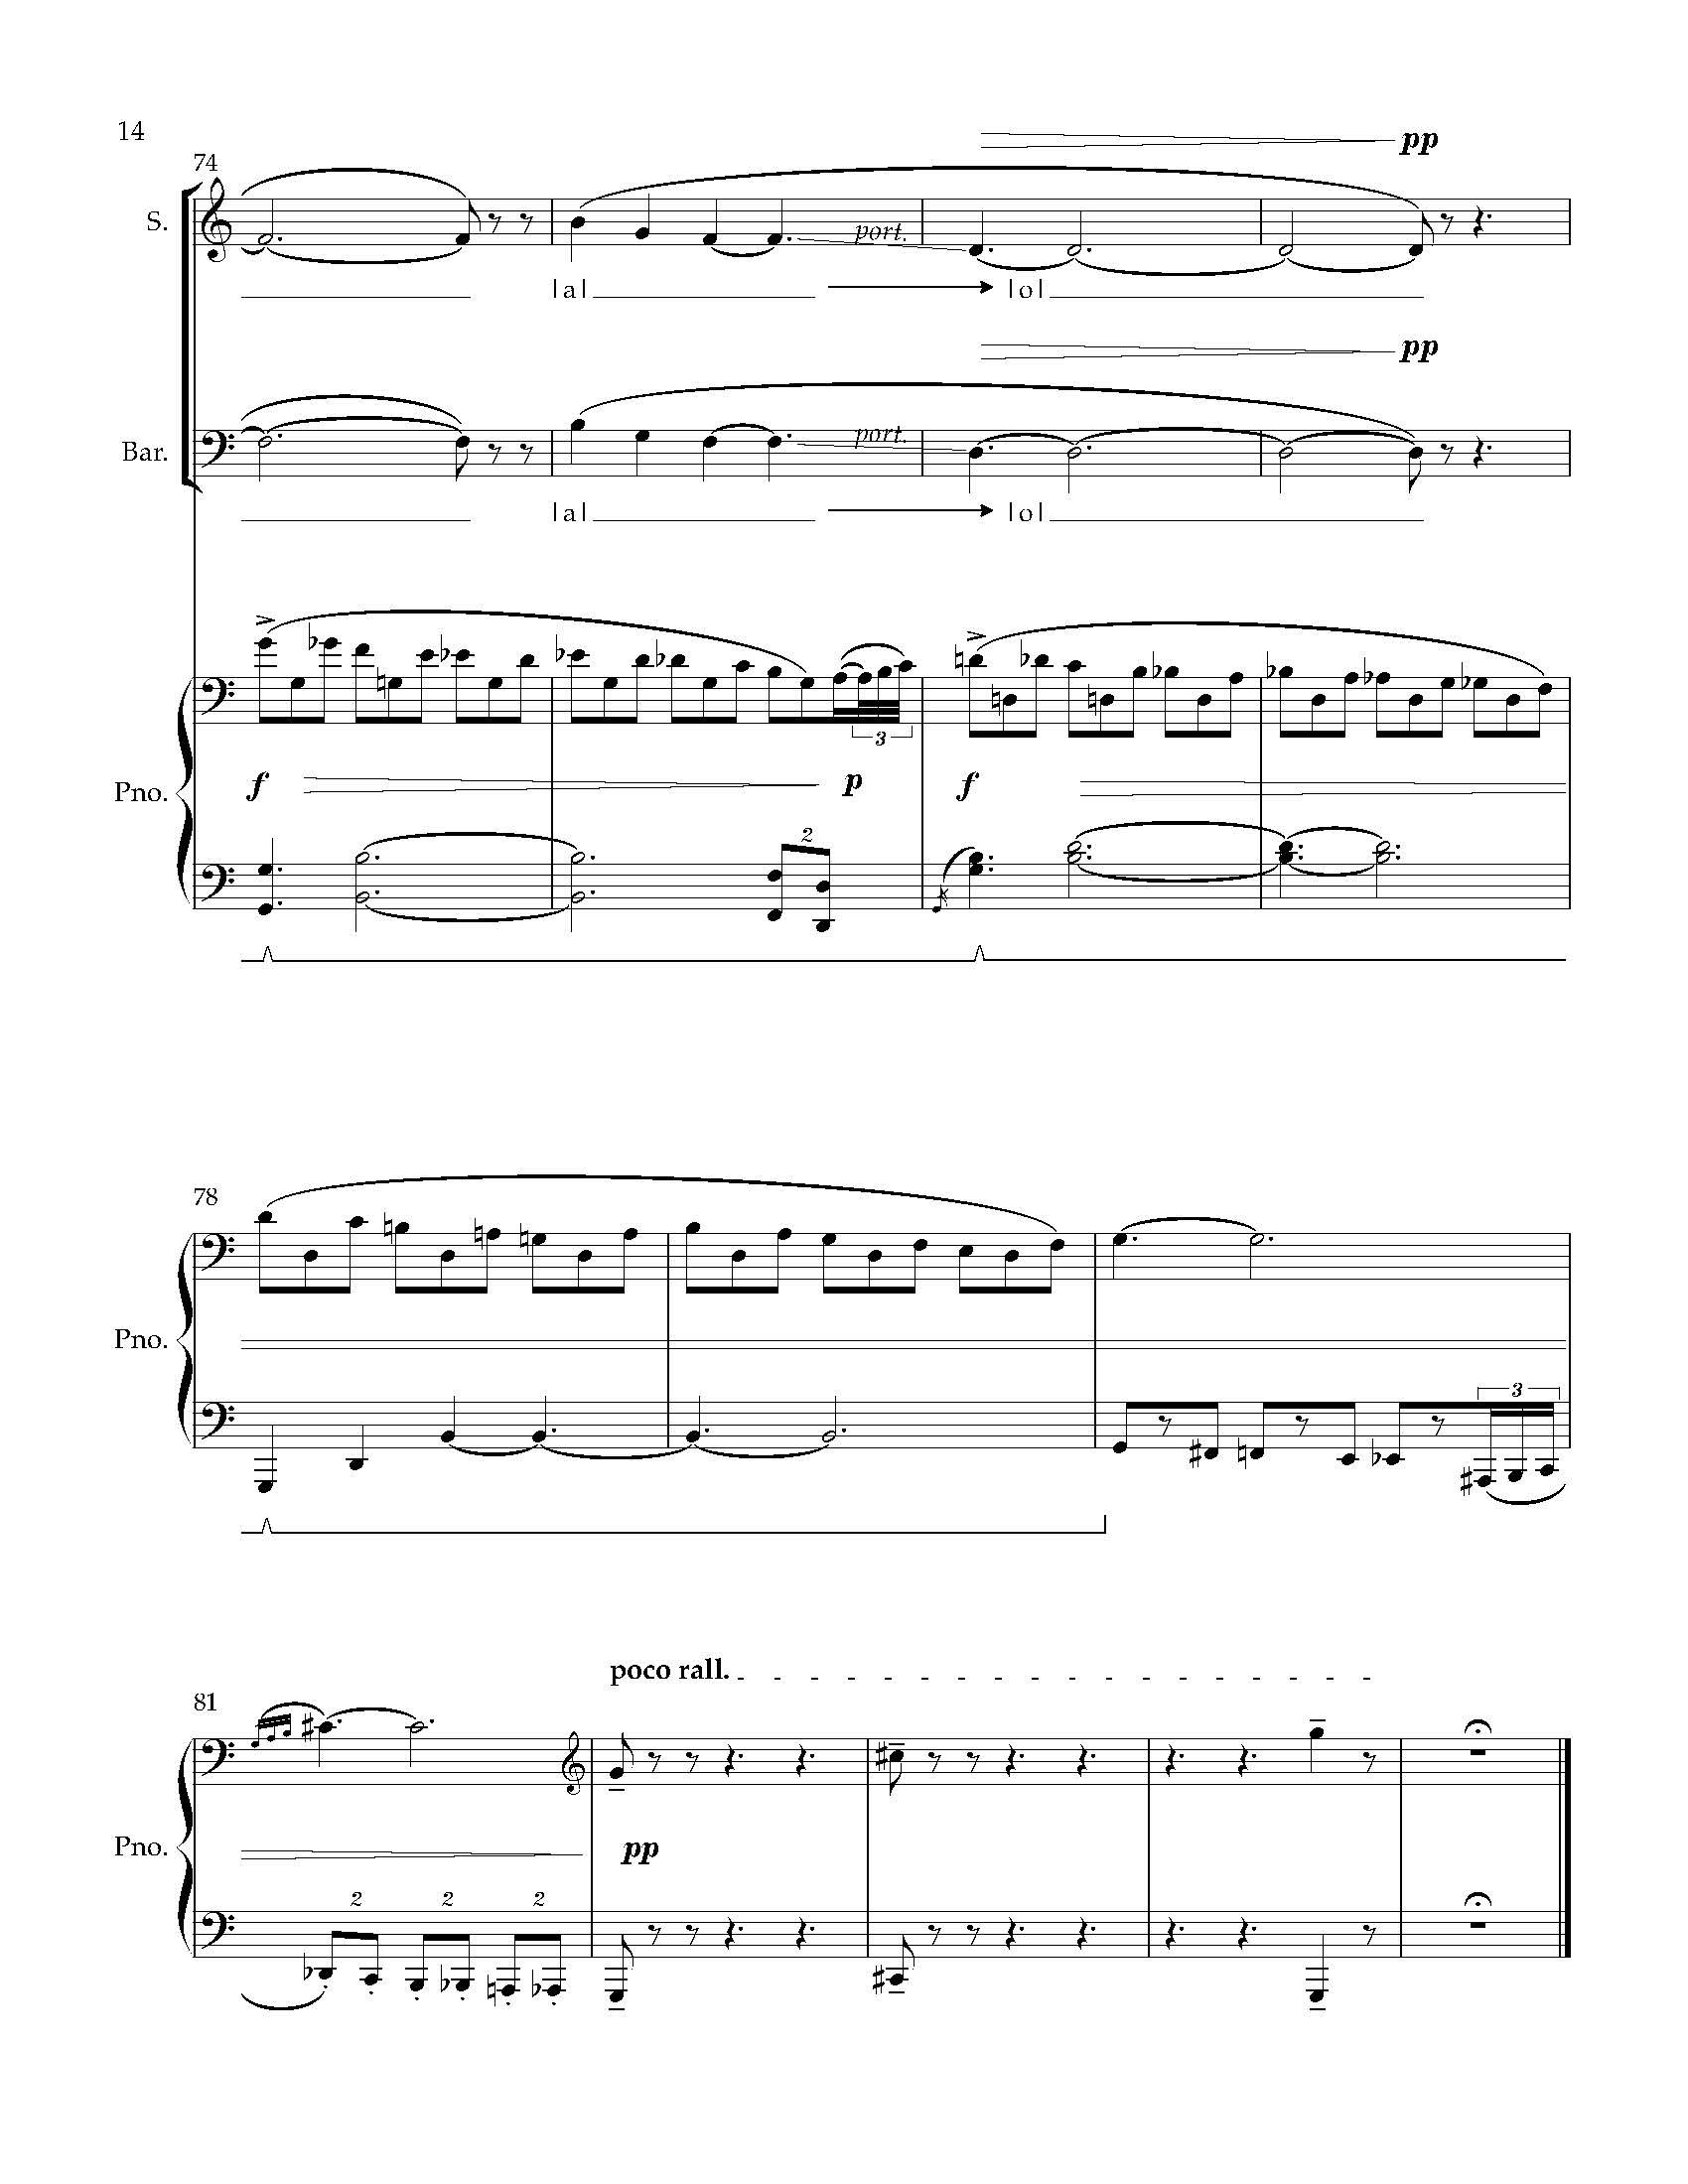 Sky - Complete Score (Revised)_Page_20.jpg